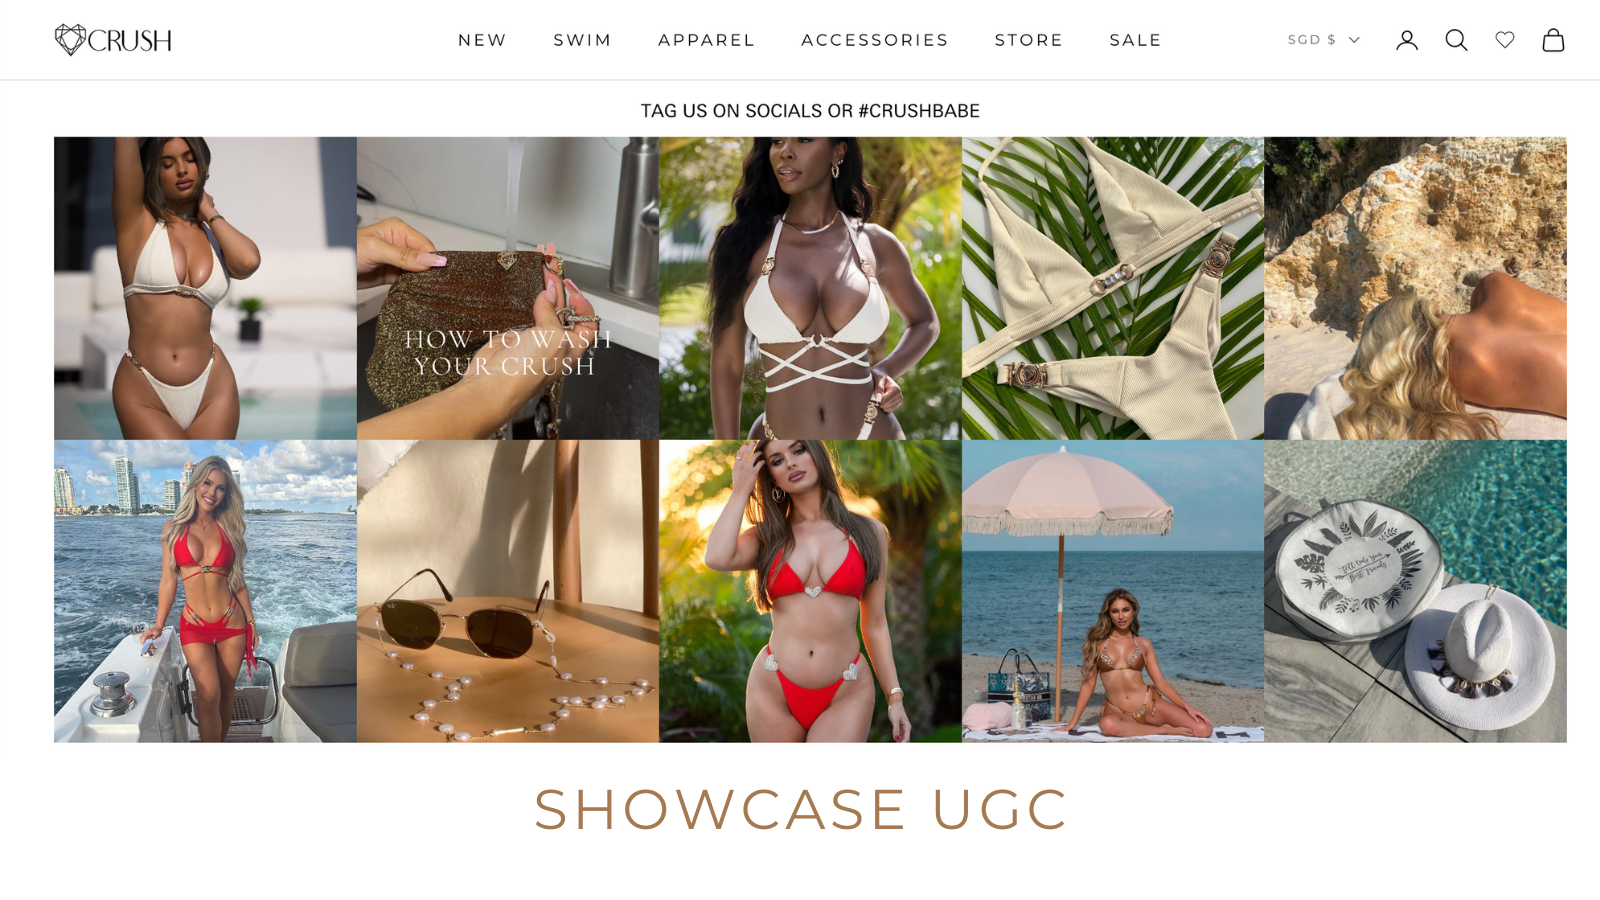 Display customer photos and videos from Instagram & UGC uploads